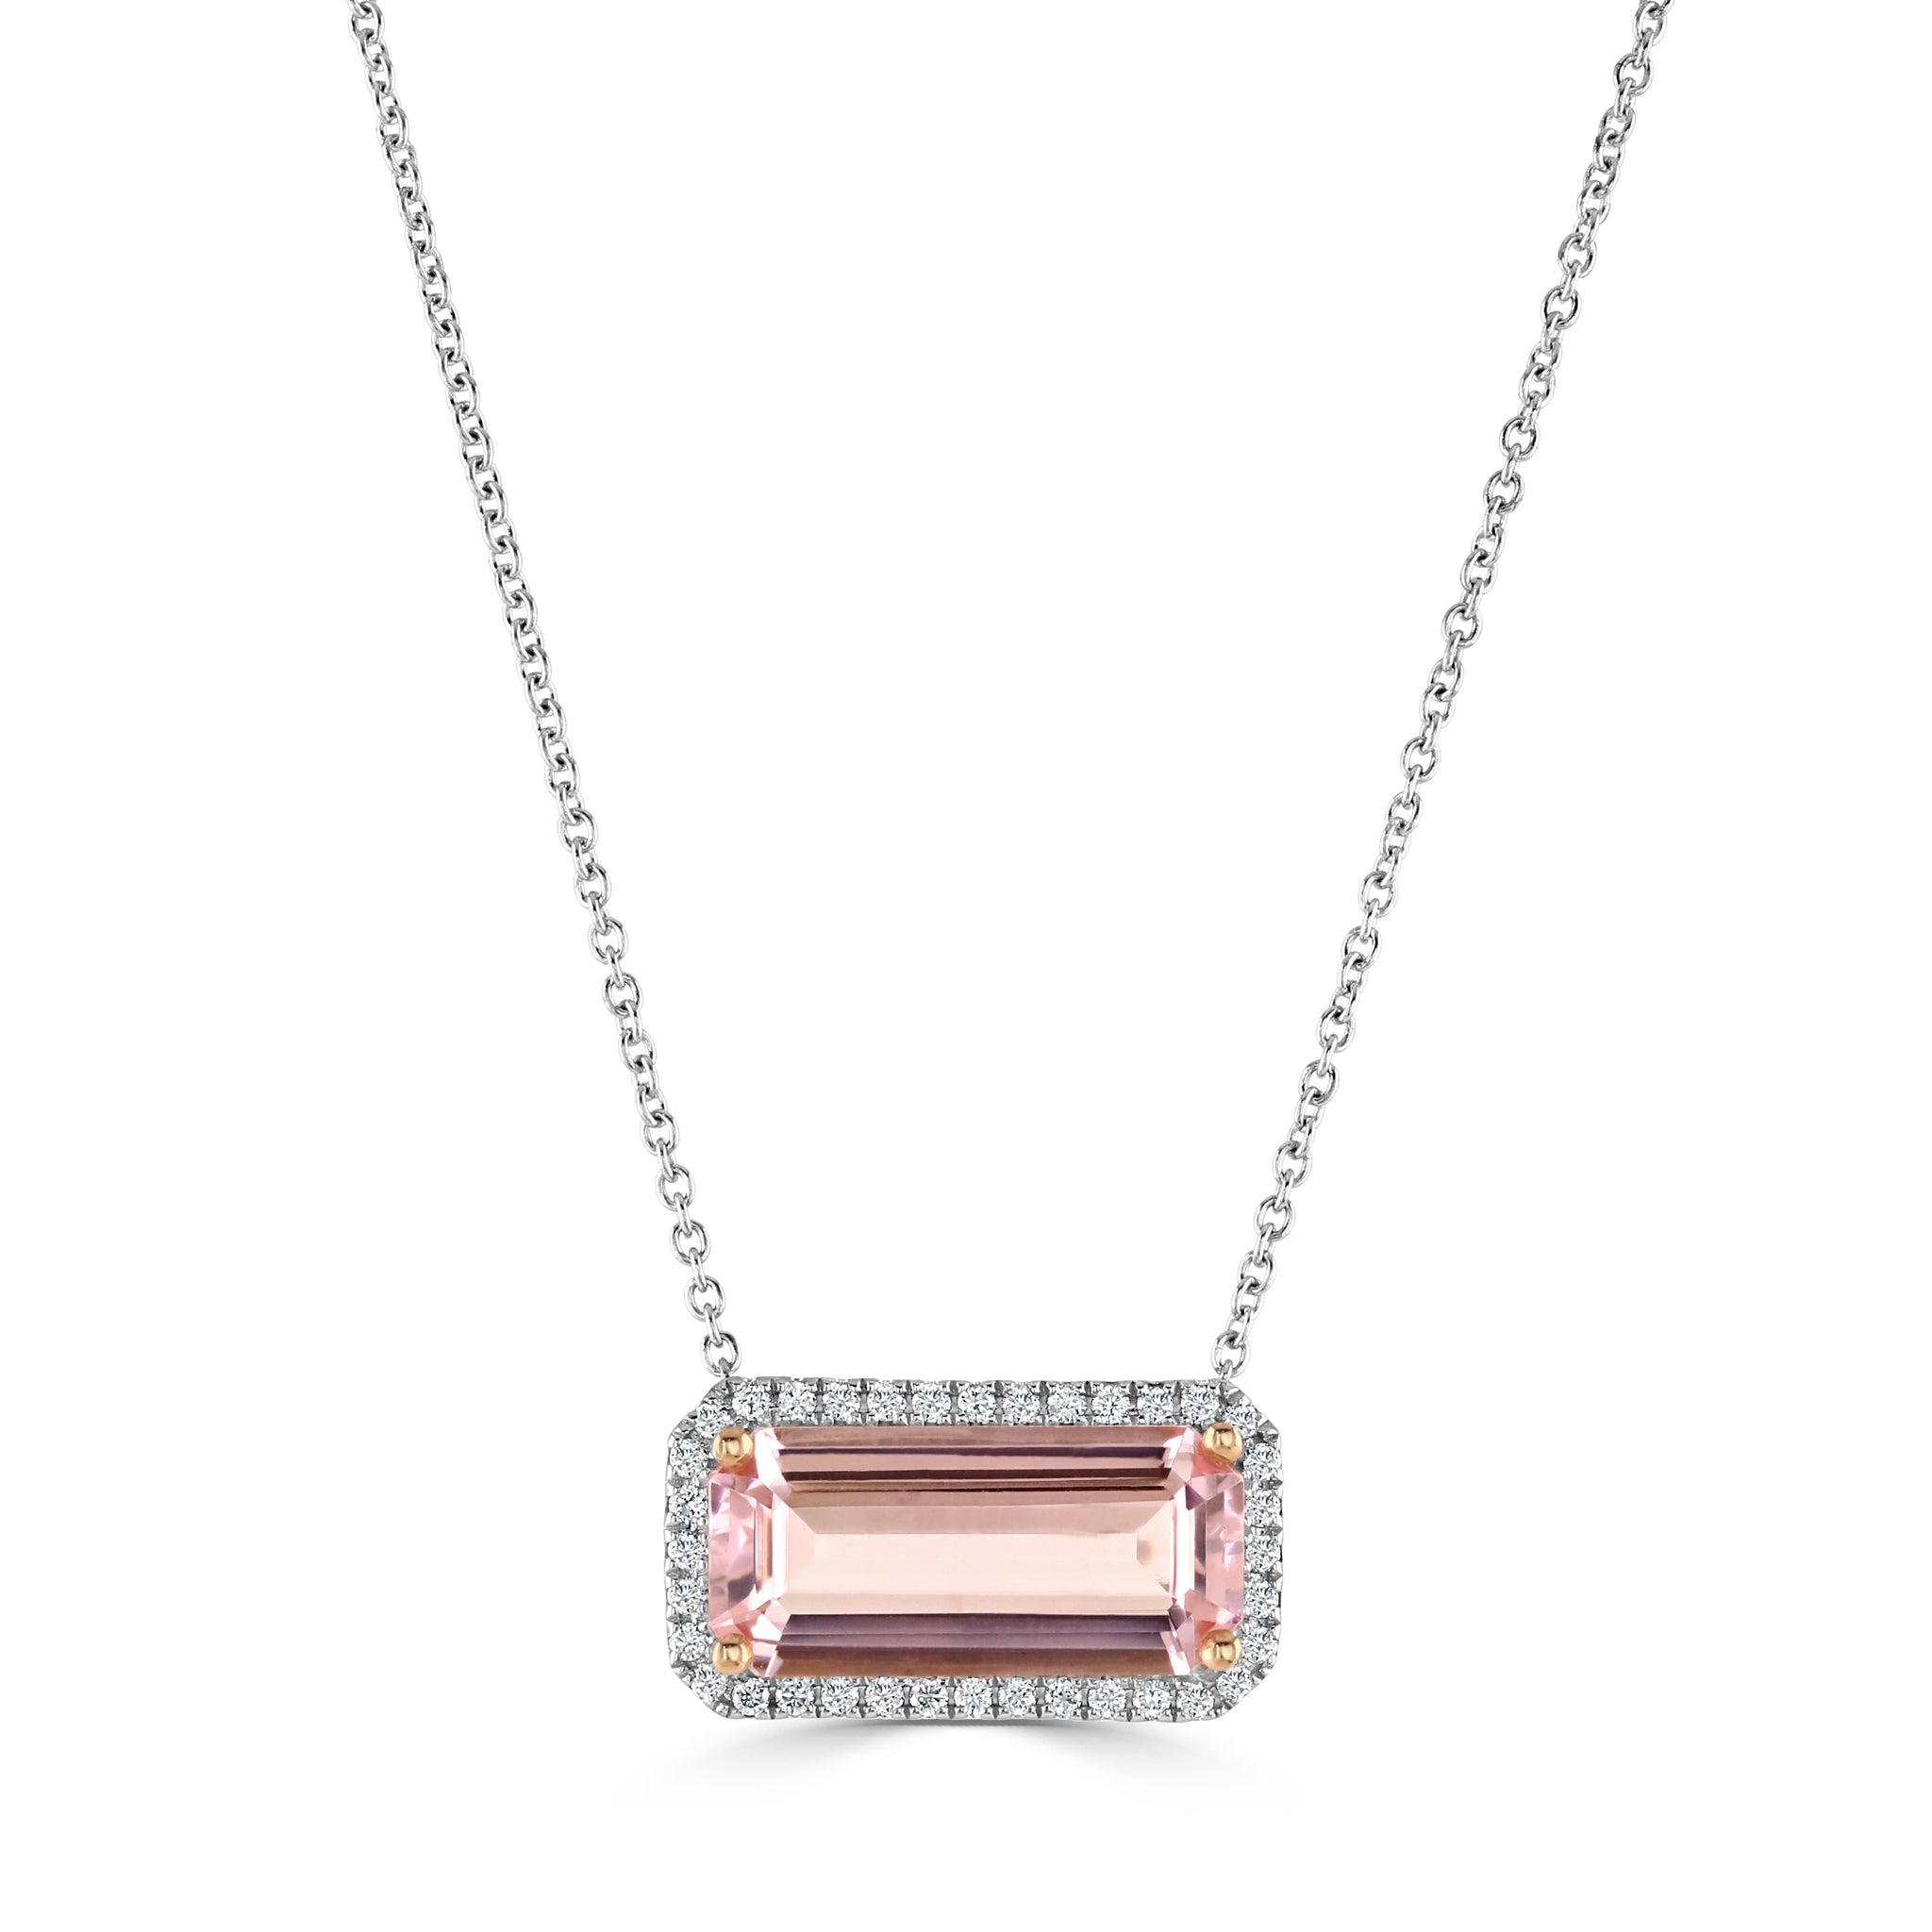 18ct white and rose gold 1.00ct octagon cut morganite and 0.13ct diamond halo necklace